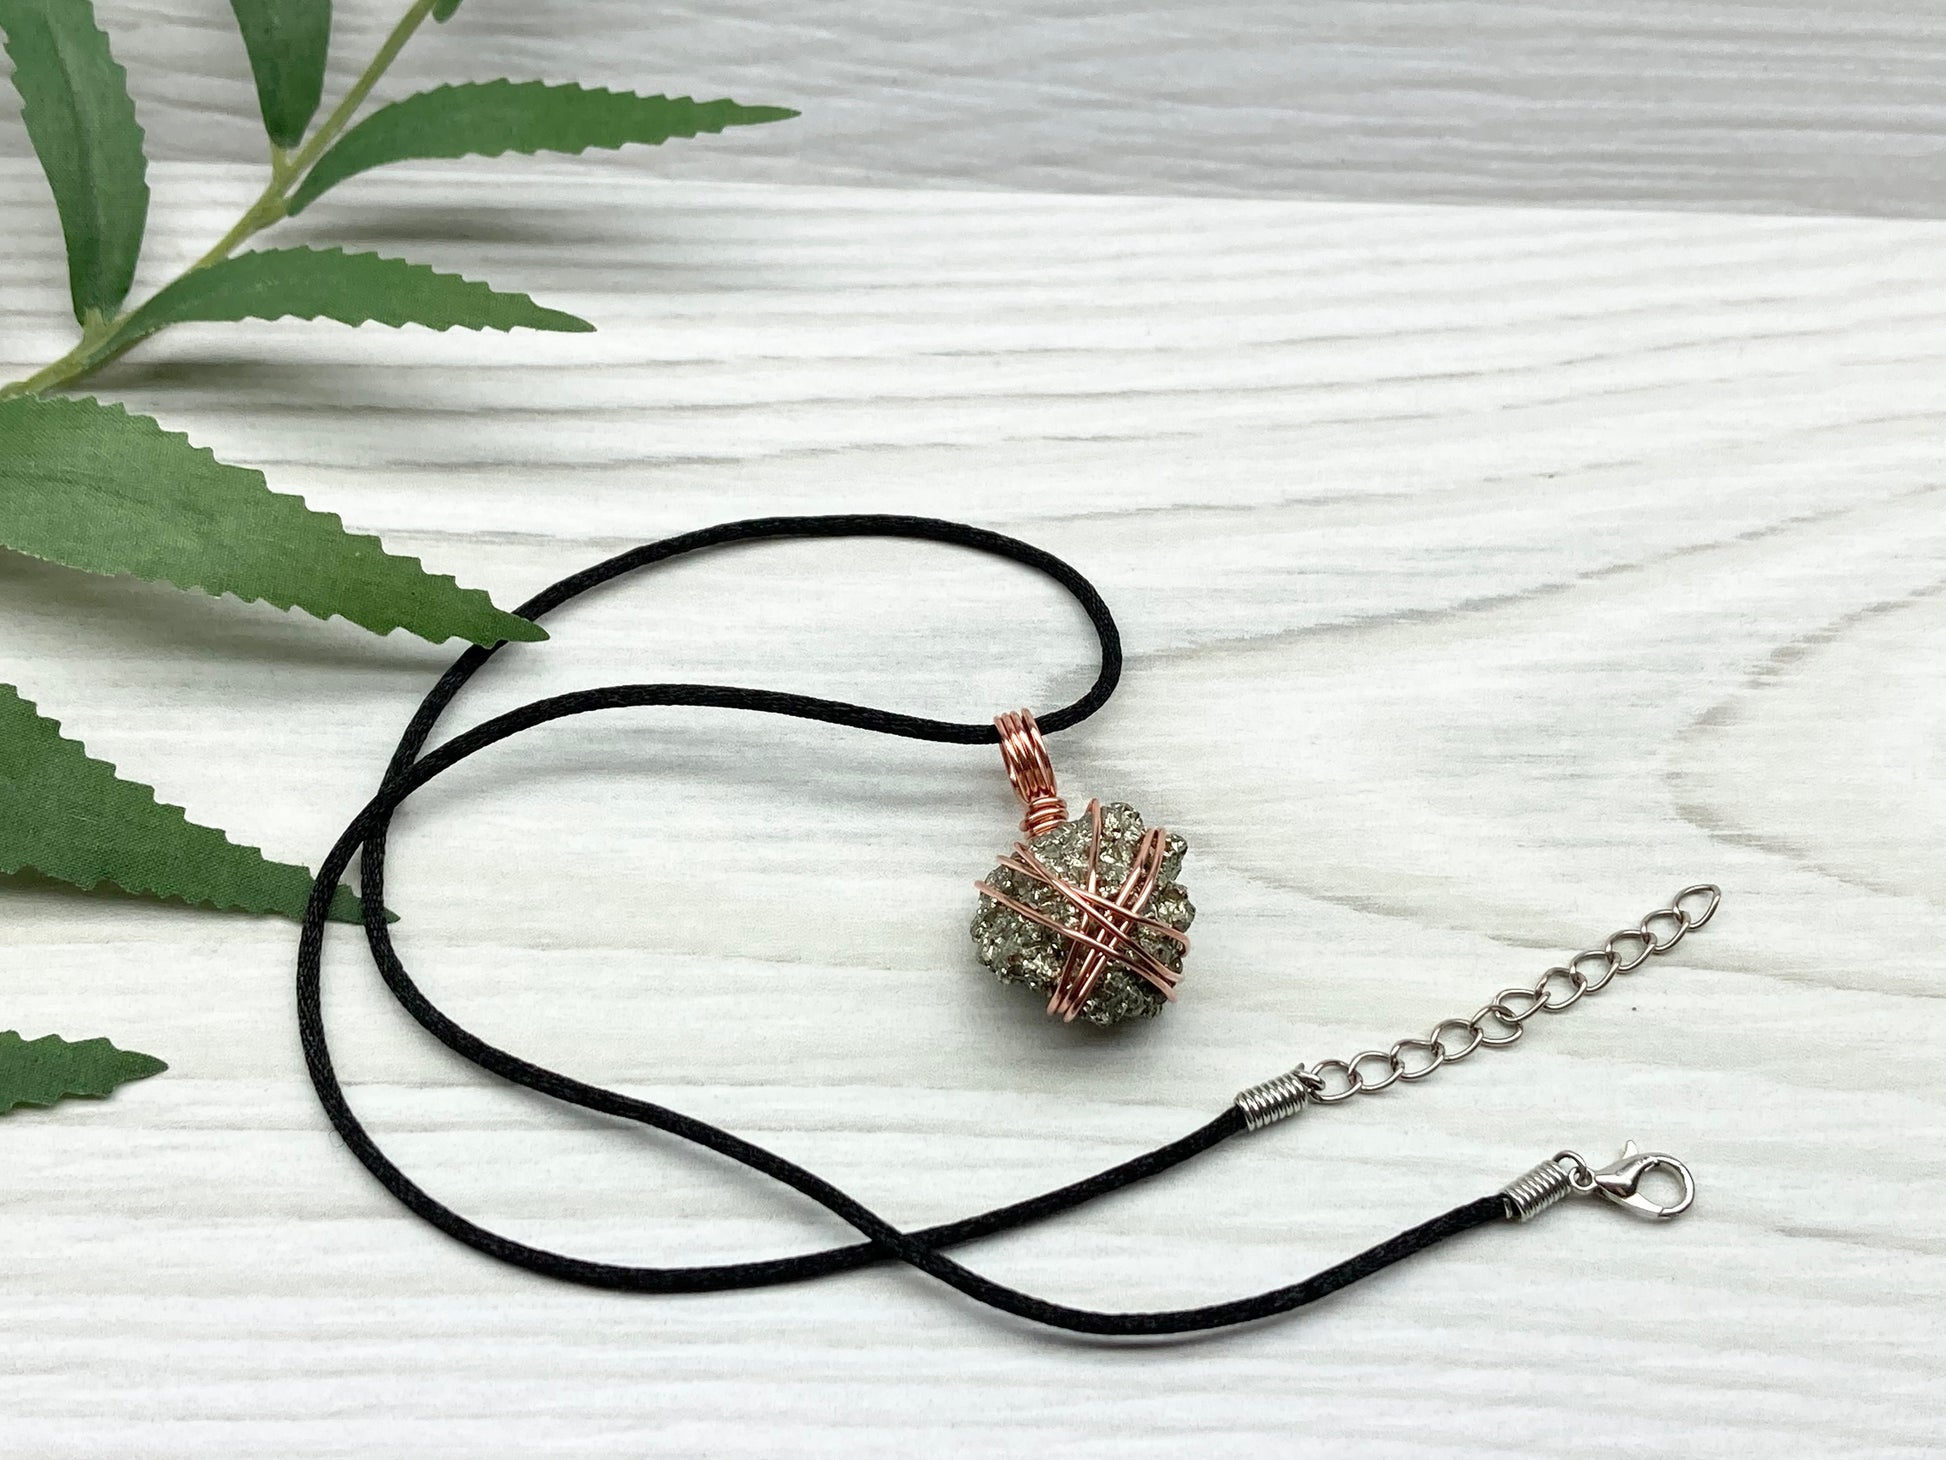 Raw Pyrite Necklace. Natural Pyrite Hand Wrapped With Copper Wire. Fools Gold Crystal Pendant. Comes On A Black Chain. Leo Zodiac Jewelry. Handmade In Tennessee.